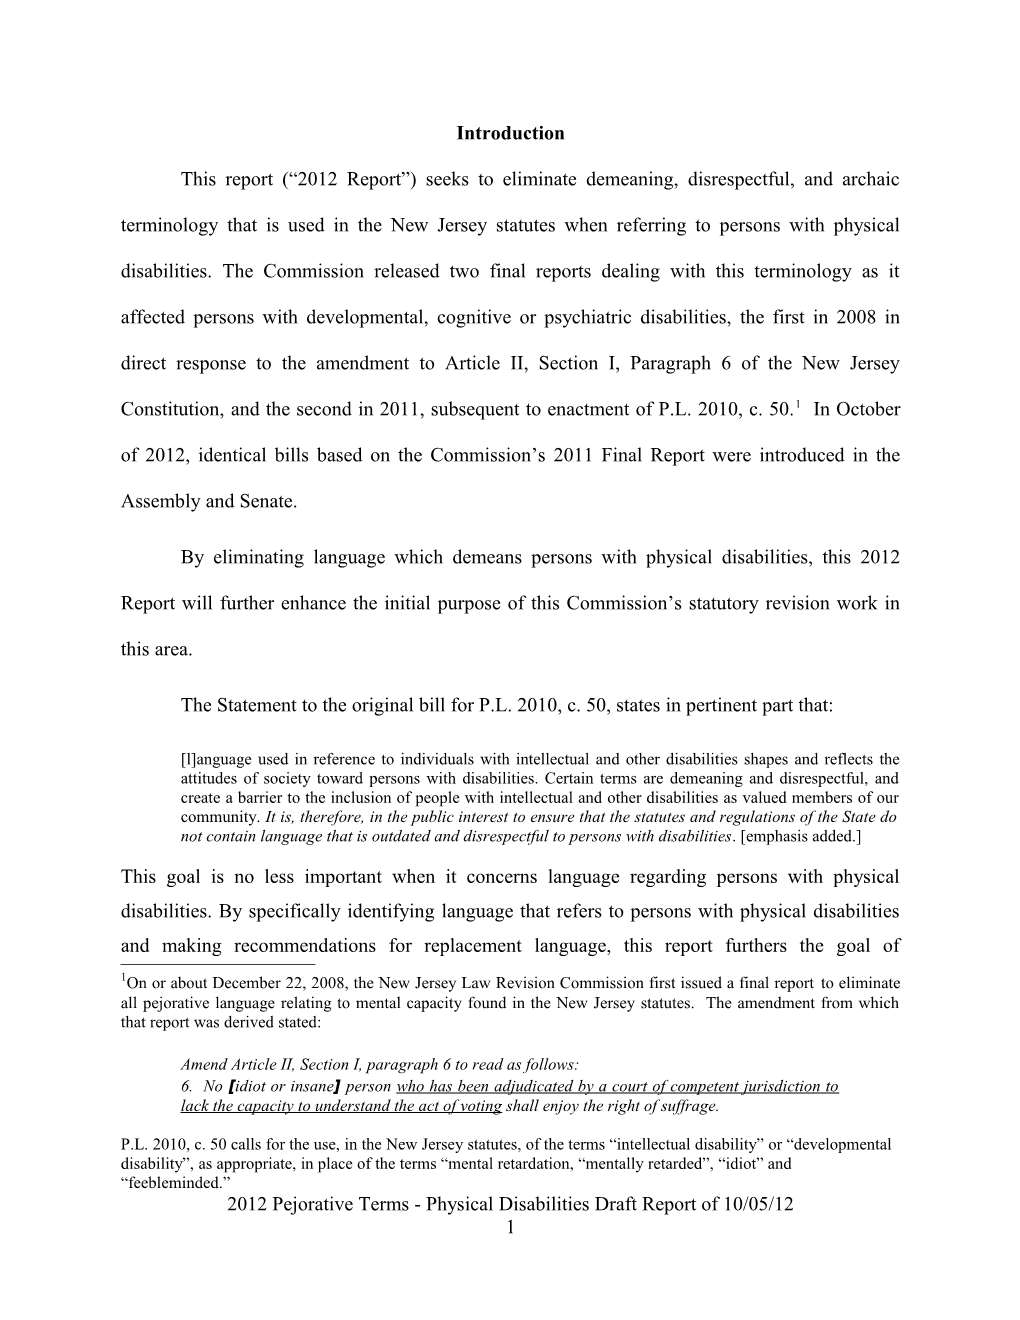 The Statement to the Original Bill for P.L. 2010, C. 50, States in Pertinent Part That